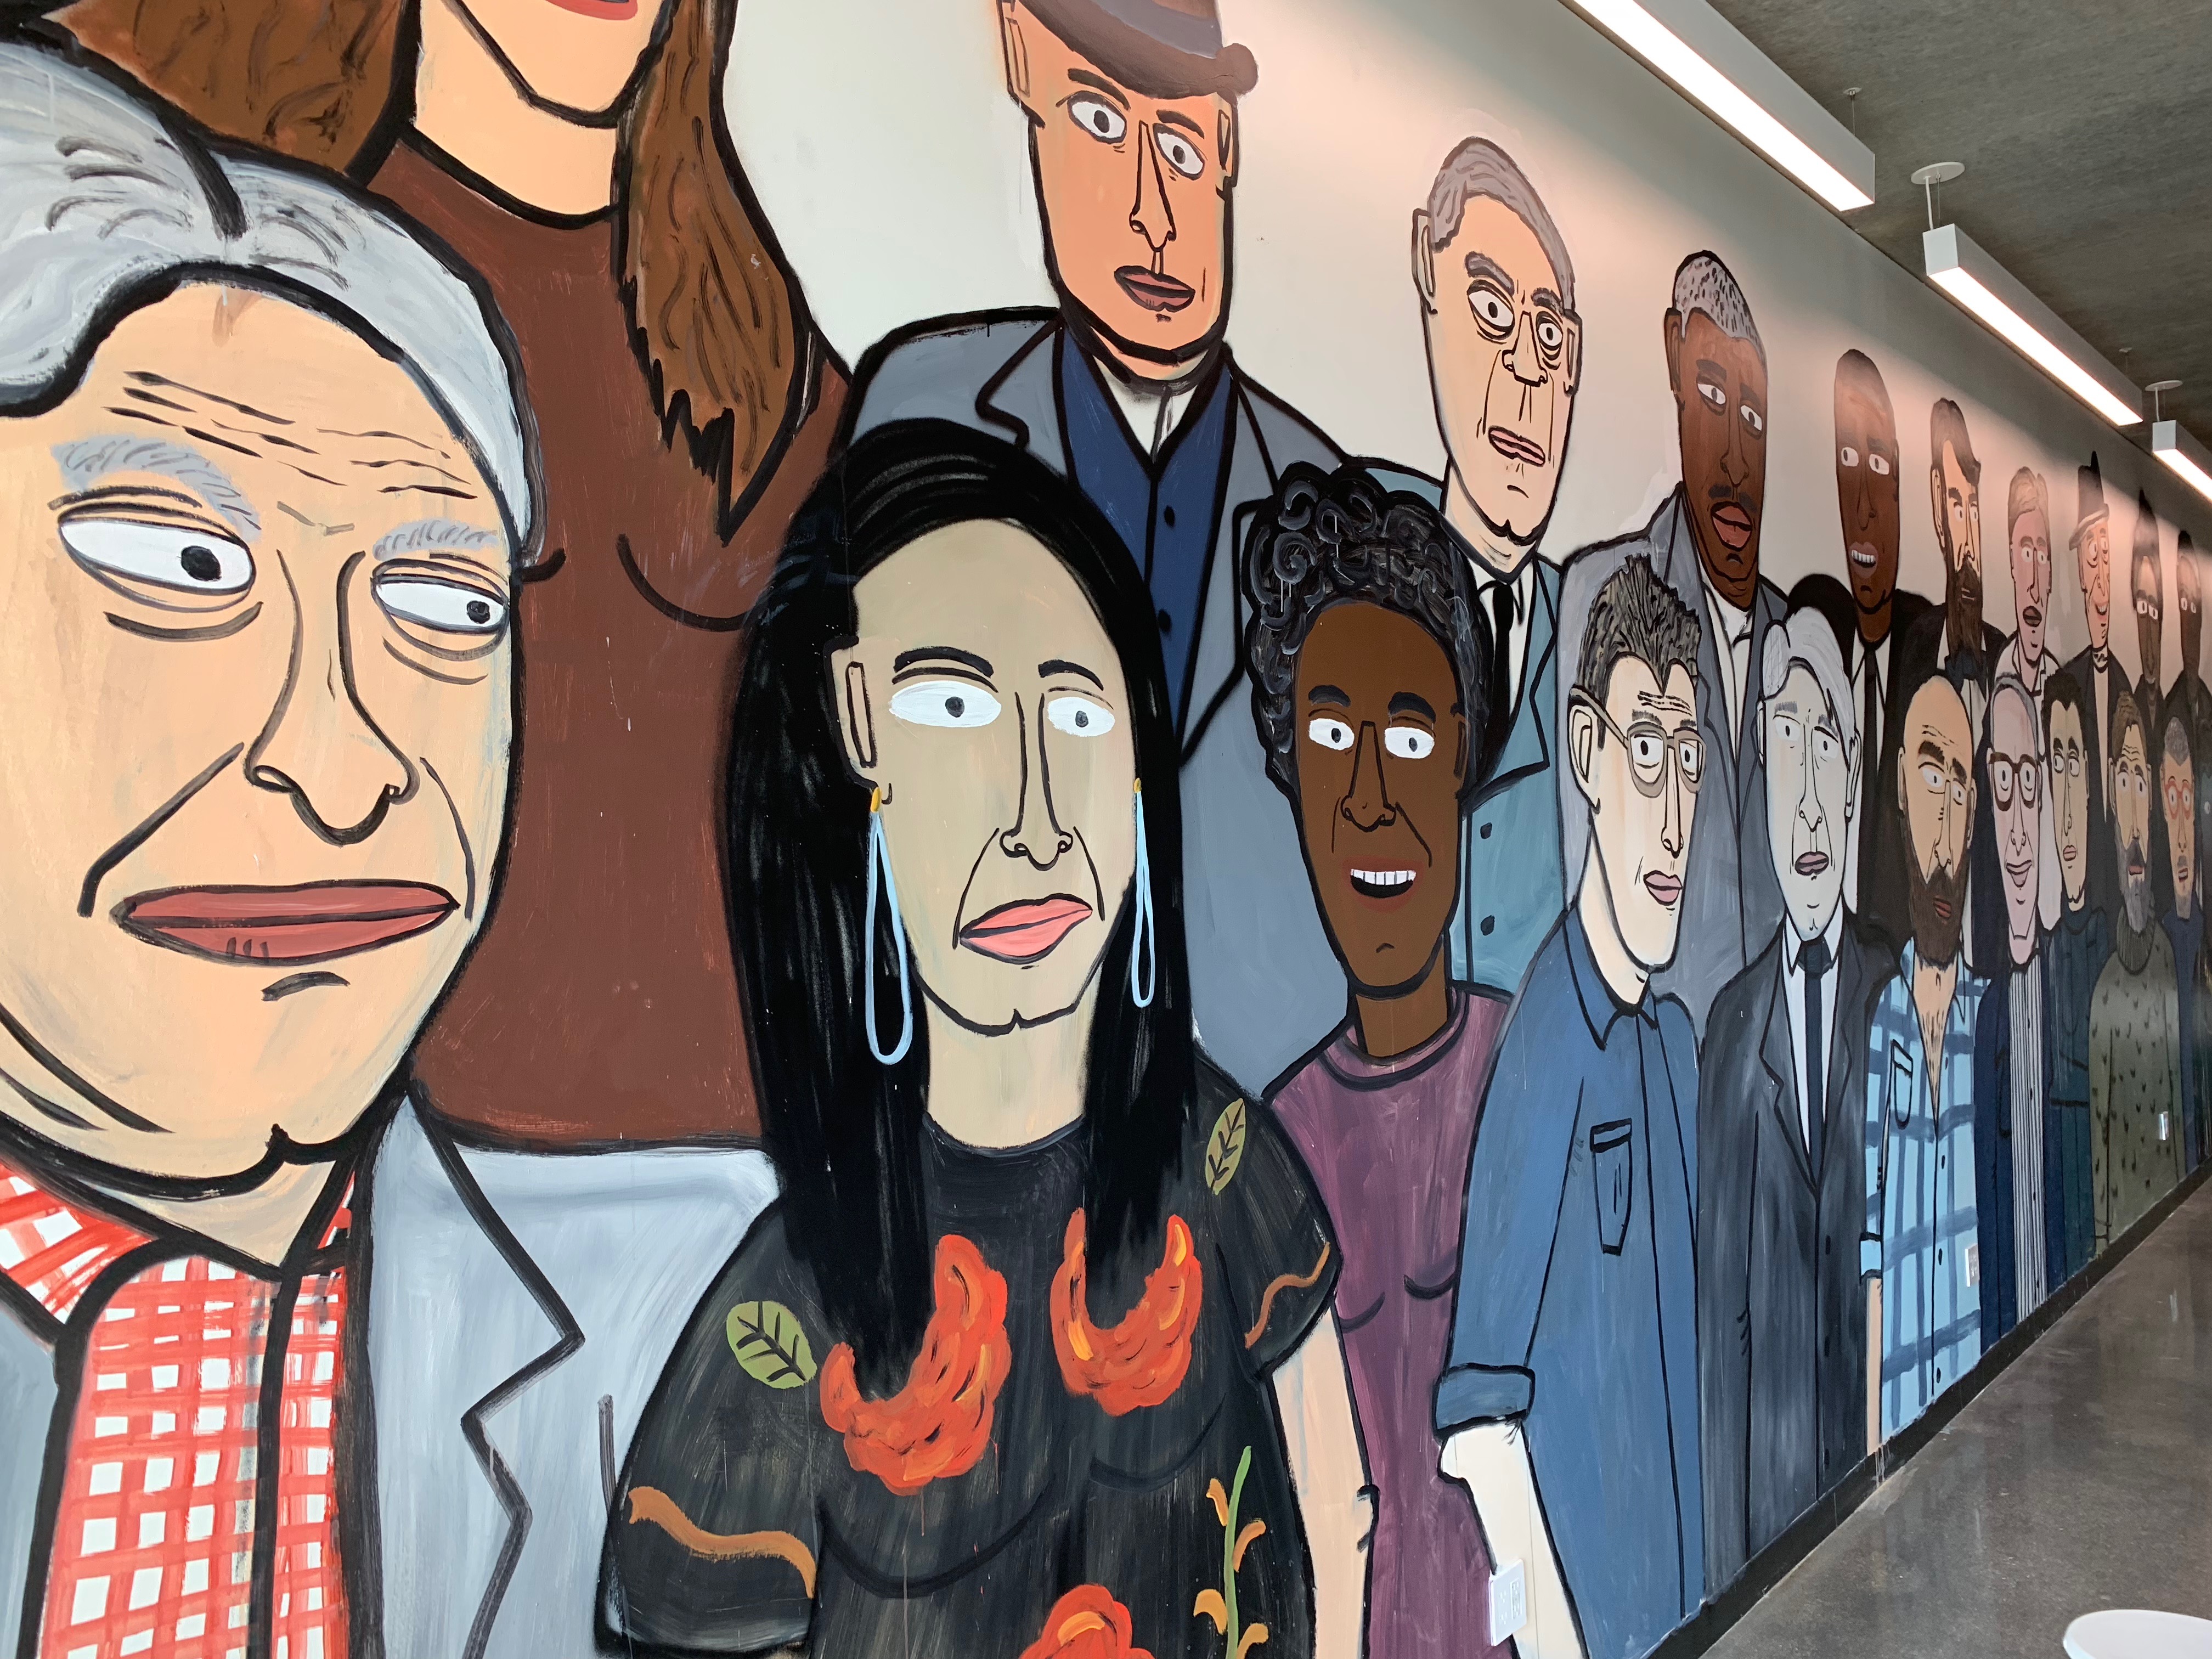 New 'Don't Fret' Mural Celebrates Chicago Writers